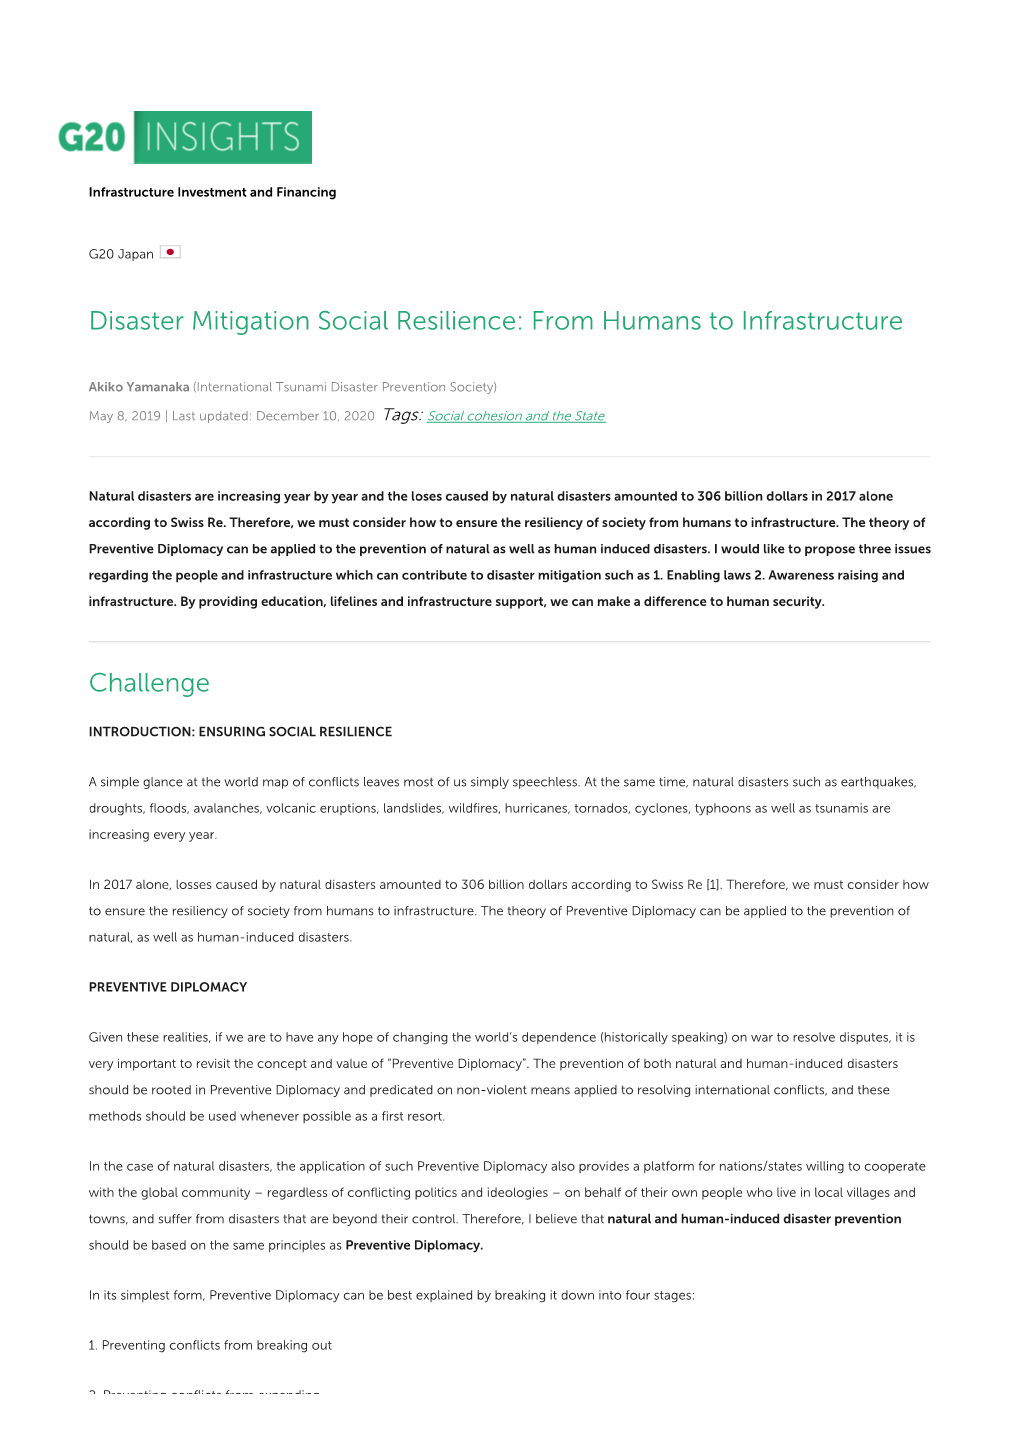 Disaster Mitigation Social Resilience: from Humans to Infrastructure